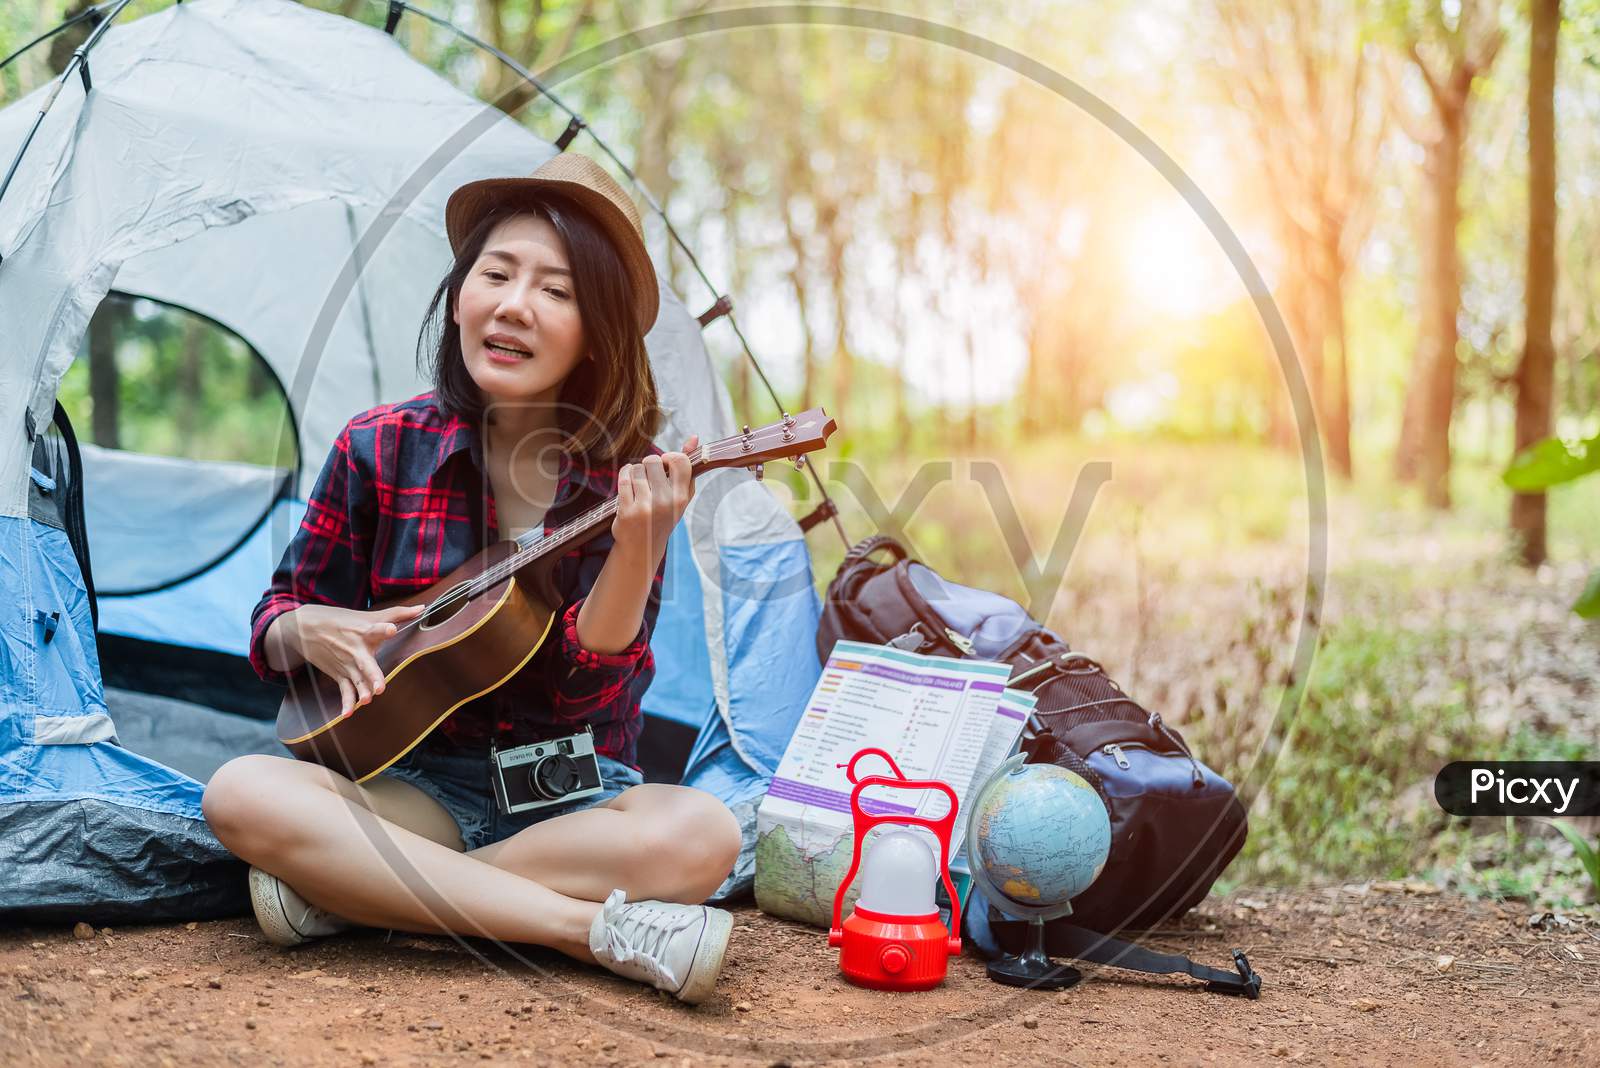 Beautiful Asian Woman Playing Ukulele In Front Of Camping Tent In Pine Woods. People And Lifestyles Concept. Adventure And Travel Theme.